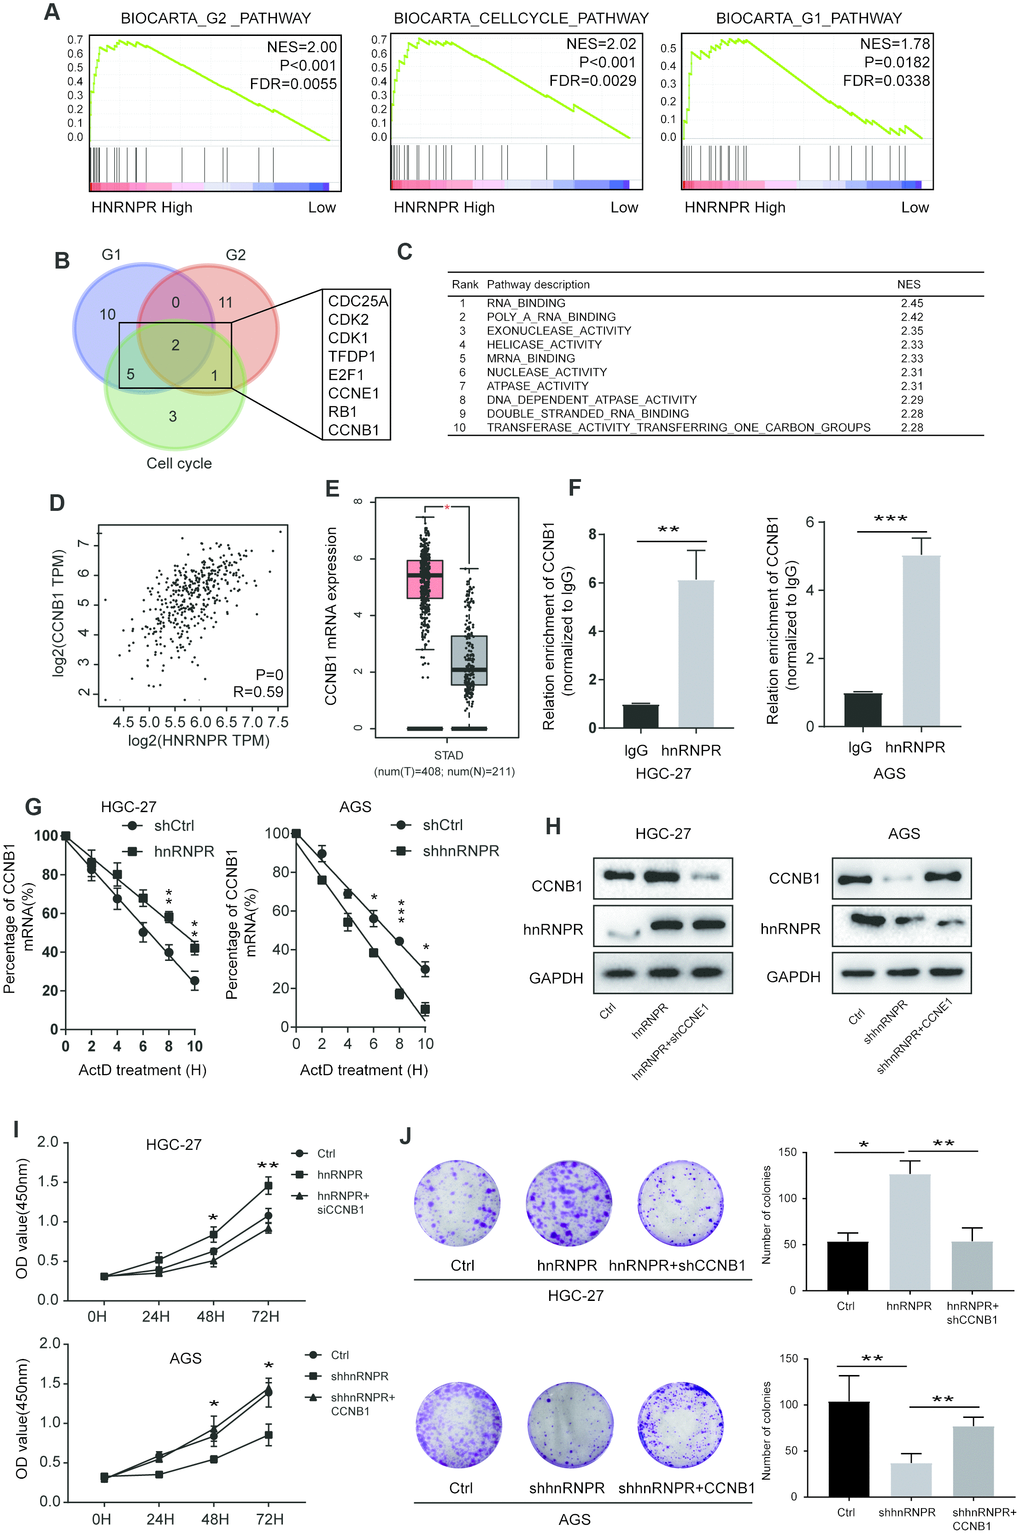 hnRNPR promoted gastric cell proliferation by binding CCNB1 mRNA. (A) GSEA showed that high hnRNPR expression was positively correlated with cell cycle pathway, G2 pathway, and G1 pathway. (B) Venn graph revealed that CDC25A, CDK2, CDK1 TFDP1, E2F1, CCNE1, RB1, CCNB1 overlapped in the three groups. (C) Pathway enrichment analysis showed that “RNA binding” is the top one with significance. (D) The expression of hnRNPR was positively correlated with the expression of CCNB1. (E) The level of CCNB1 was higher in tumors than that in normal tissues. (F) RIP-PCR indicated that CCNB1 mRNA is significantly increased hnRNPR groups in HGC-27 and AGS cell lines. (G) CCNB1 mRNA stability analysis in HGC-27 and AGS cells after actinomycin D (ActD) treatment. Cells were transfected with hnRNPR or shhnRNPR or a control. Cells were harvested at the indicated timepoints. Expression levels were normalized to “0 h” and GAPDH was used as reference gene. (H) HGC-27-control and HGC-27-hnRNPR cells were transfected with shRNA control or shRNA against CCNB1 for western blot, and AGS-control and AGS-shRNPR cells transfected with control or CCNB1 plasmid for western blot. (I) CCK8 and (J) colony formation assays showed that CCNB1 knockdown partially attenuated the enhanced cell proliferation induced by hnRNPR overexpression in HGC-27 cells, while CCNB1 overexpression partially rescued the inhibition of cell growth induced by hnRNPR silencing in AGS cells. Data are from three independent experiments performed in triplicate. P values were calculated with two-tailed unpaired Student’s t test. The expression correlation was determined with Pearson’s correlation analysis. *, P